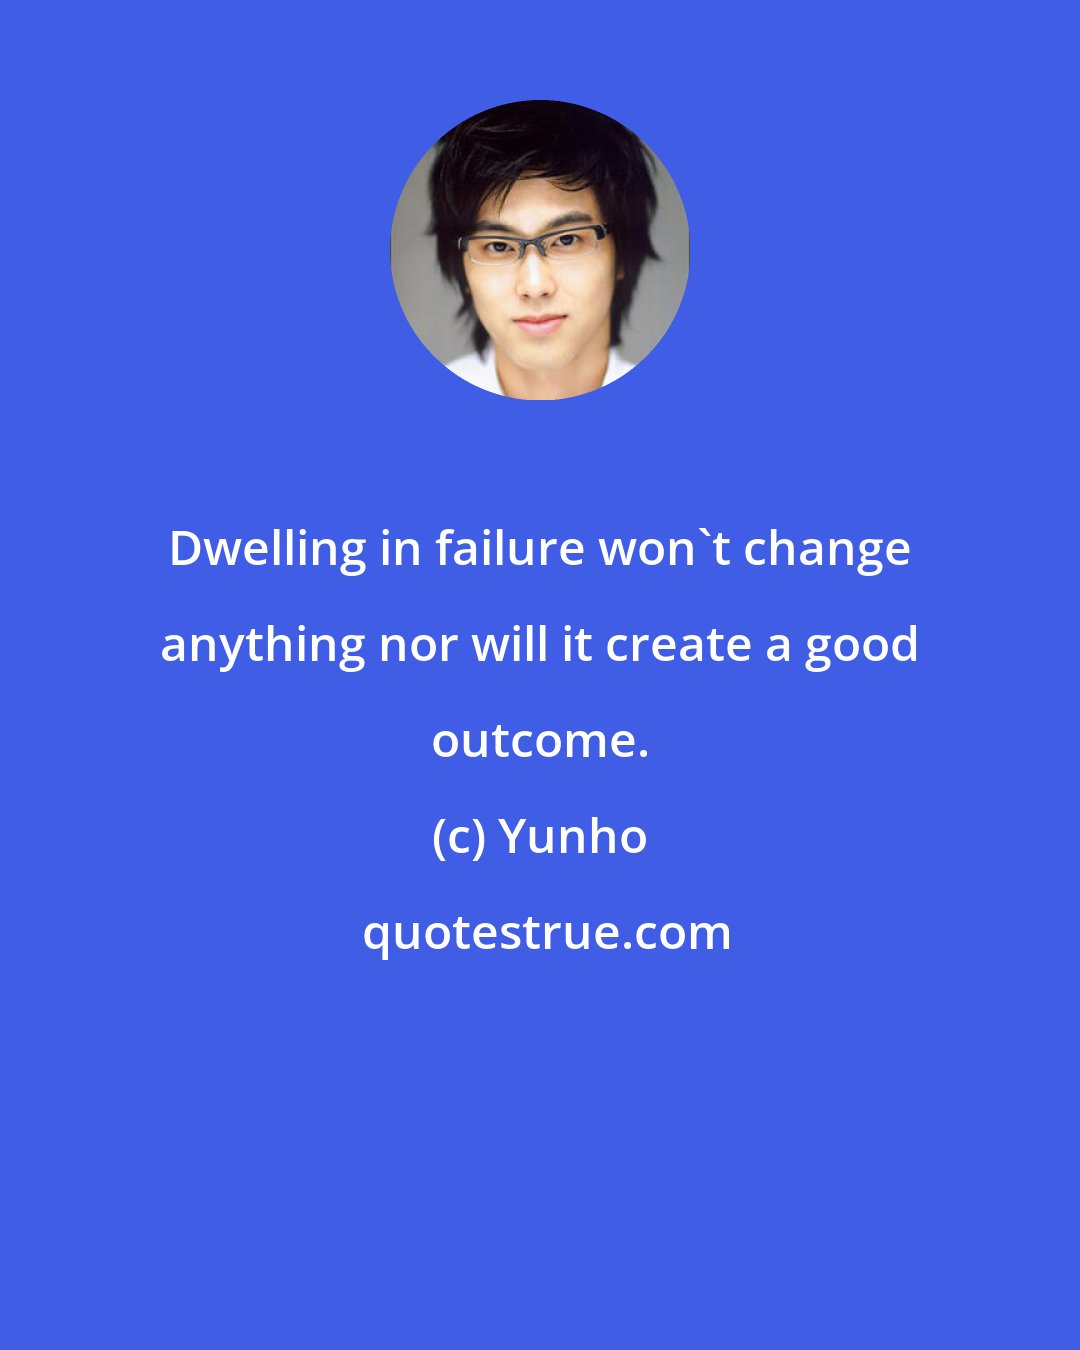 Yunho: Dwelling in failure won't change anything nor will it create a good outcome.